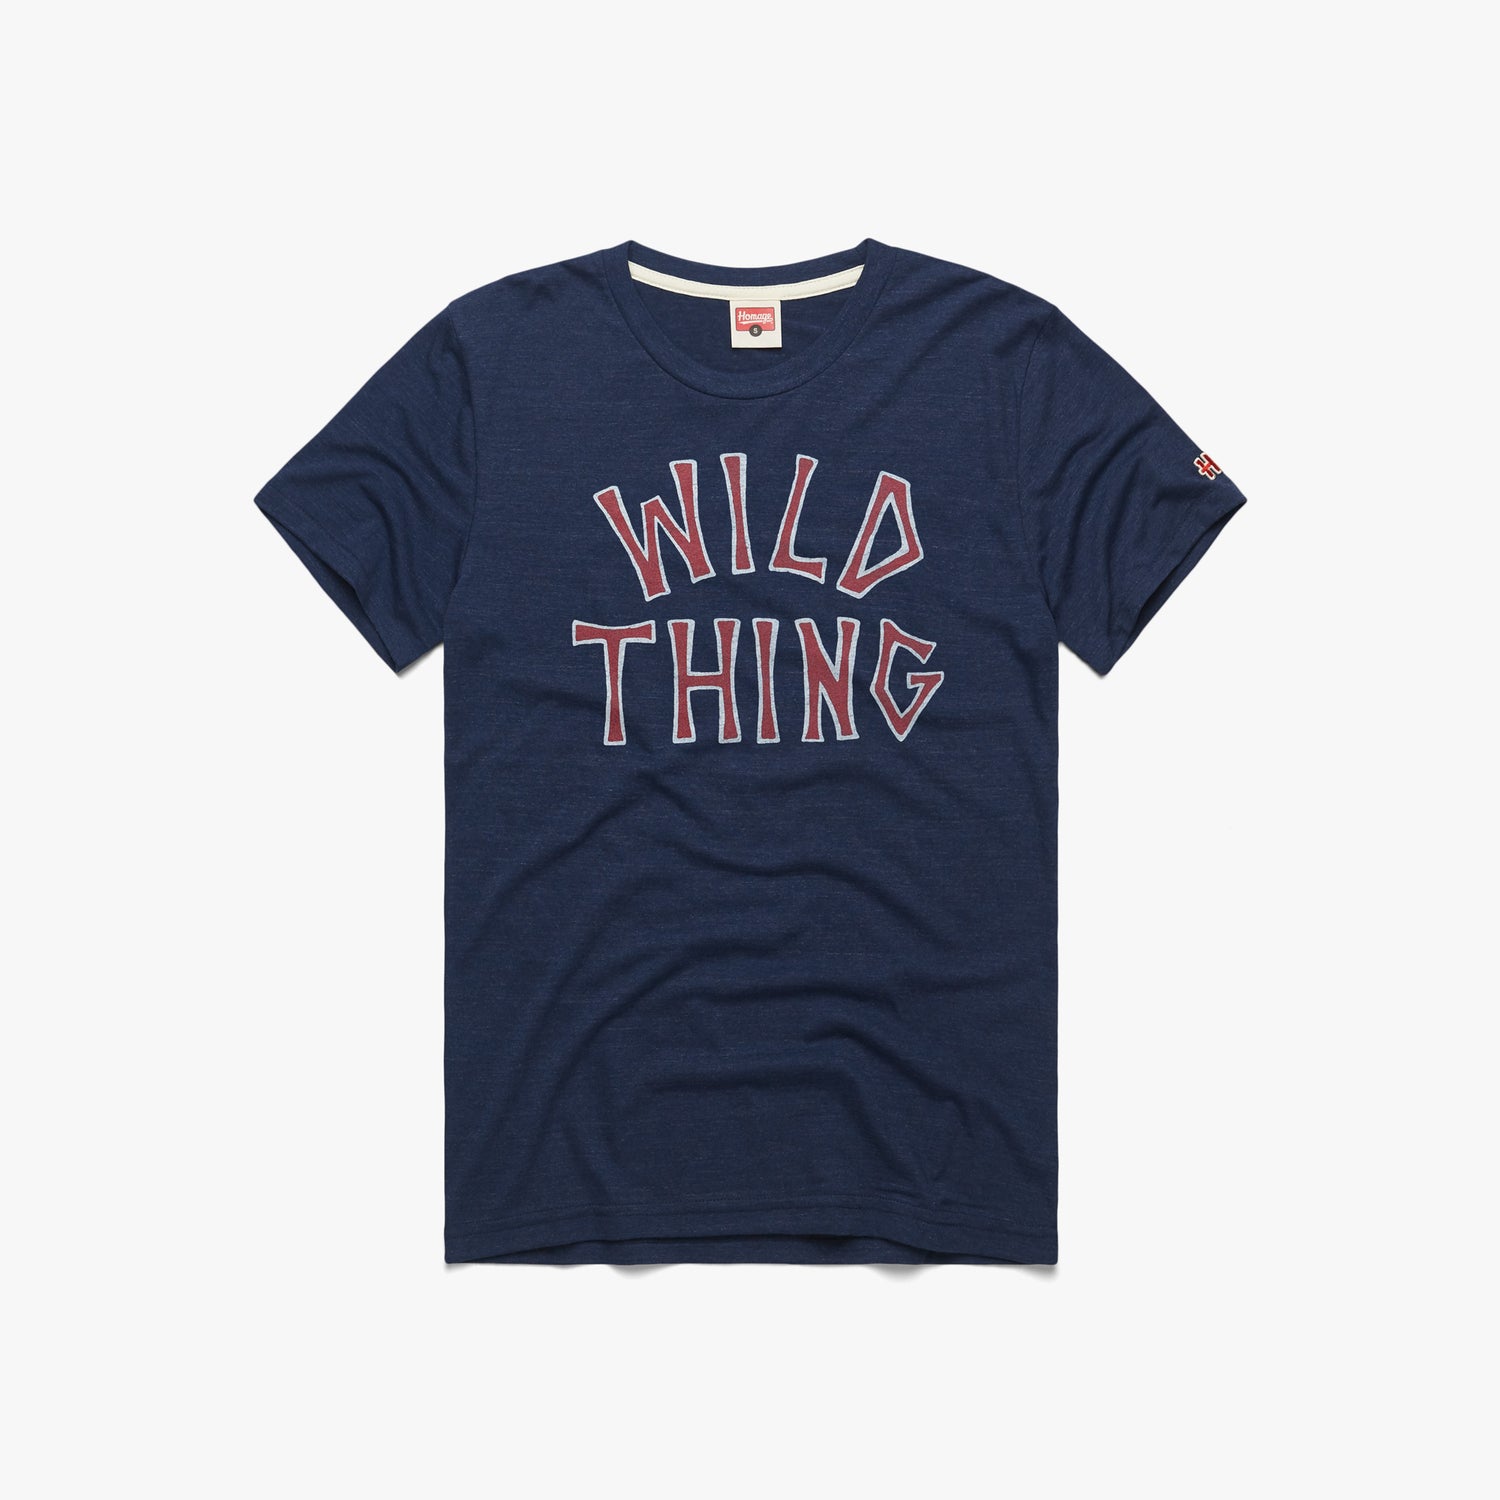 Wild Thing Essential T-Shirt for Sale by Indestructibbo